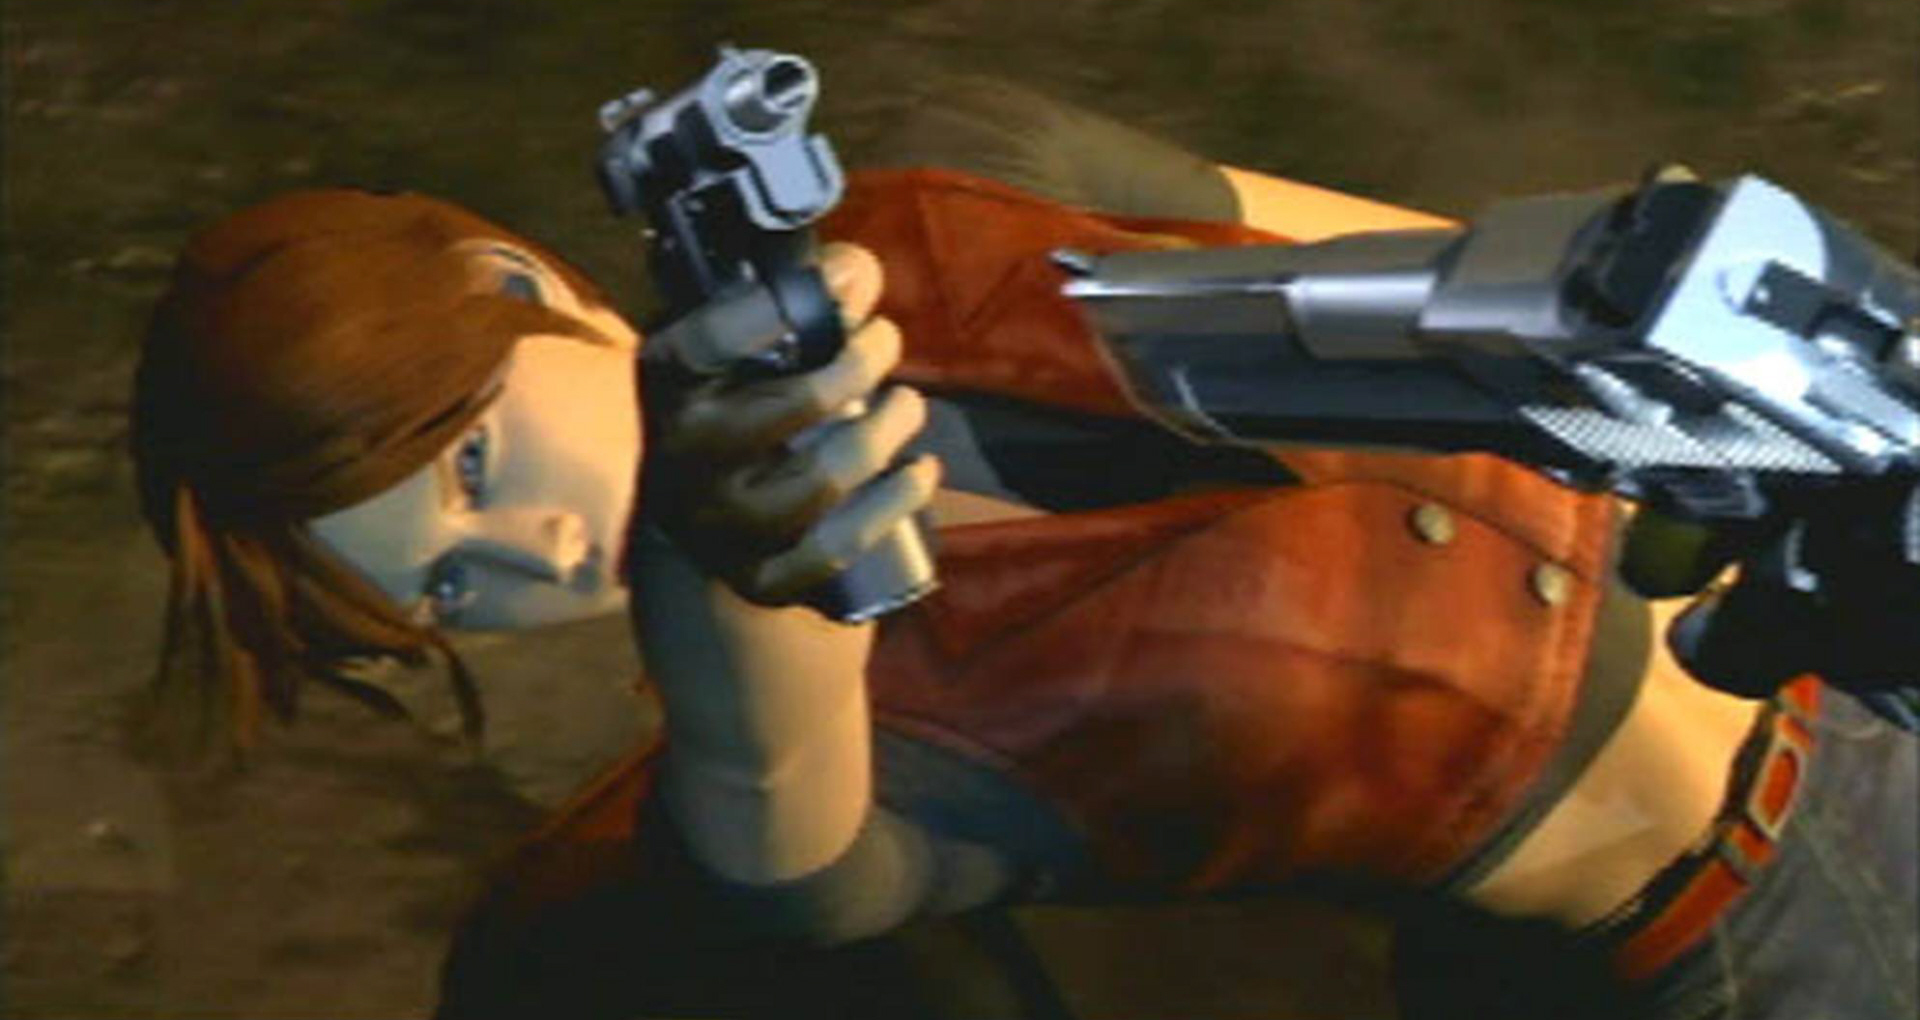 ListenToMePlay Resident Evil: Code Veronica Part 3. Torture Room, Airport, Music Box Puzzle, Meeting Alexia And Alexander Ashford, Submarine, Marry Go Round, Airplane, Arctic Facility, Sappy Claire And Steve Love Plot And Boss Fight